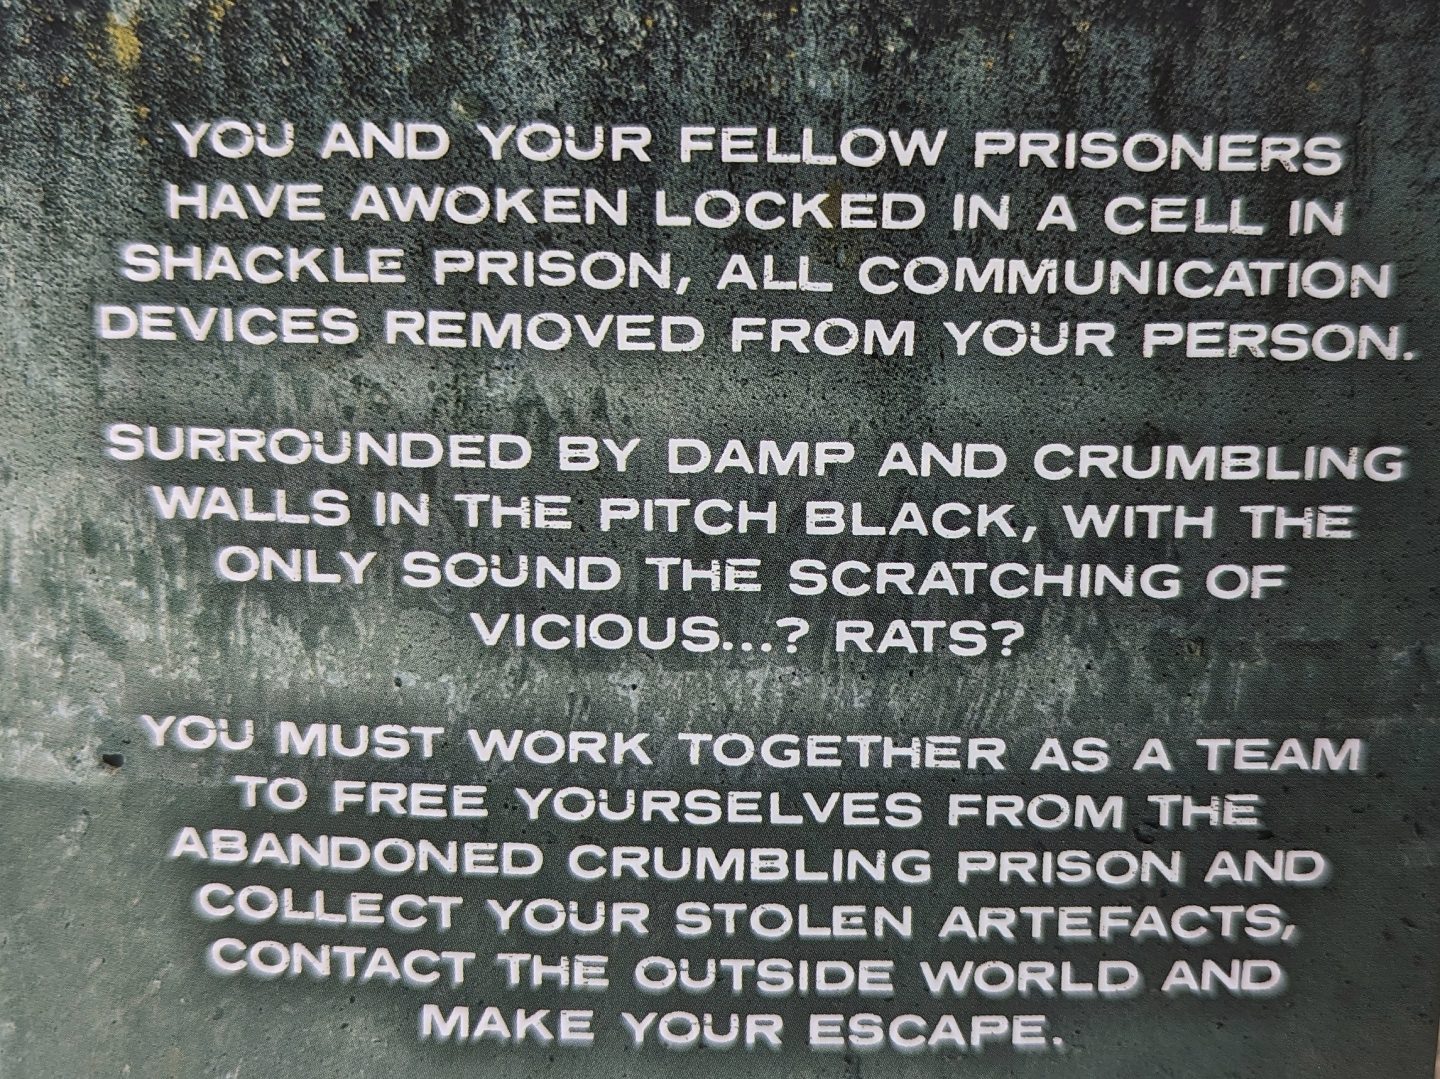 Text image setting the scene for phone escape room. You and your fellow prisoners have awoken locked in a cell in shackle prison, all communication devices removed from your person. Surrounded by damp and crumbling walls in the pitch black, with the only sound the scratching of vicious... rats? You must work together as a team to free yourselves from the abandoned crumbling prison and collect your stolen artefacts, contact the outside world and make your escape. 